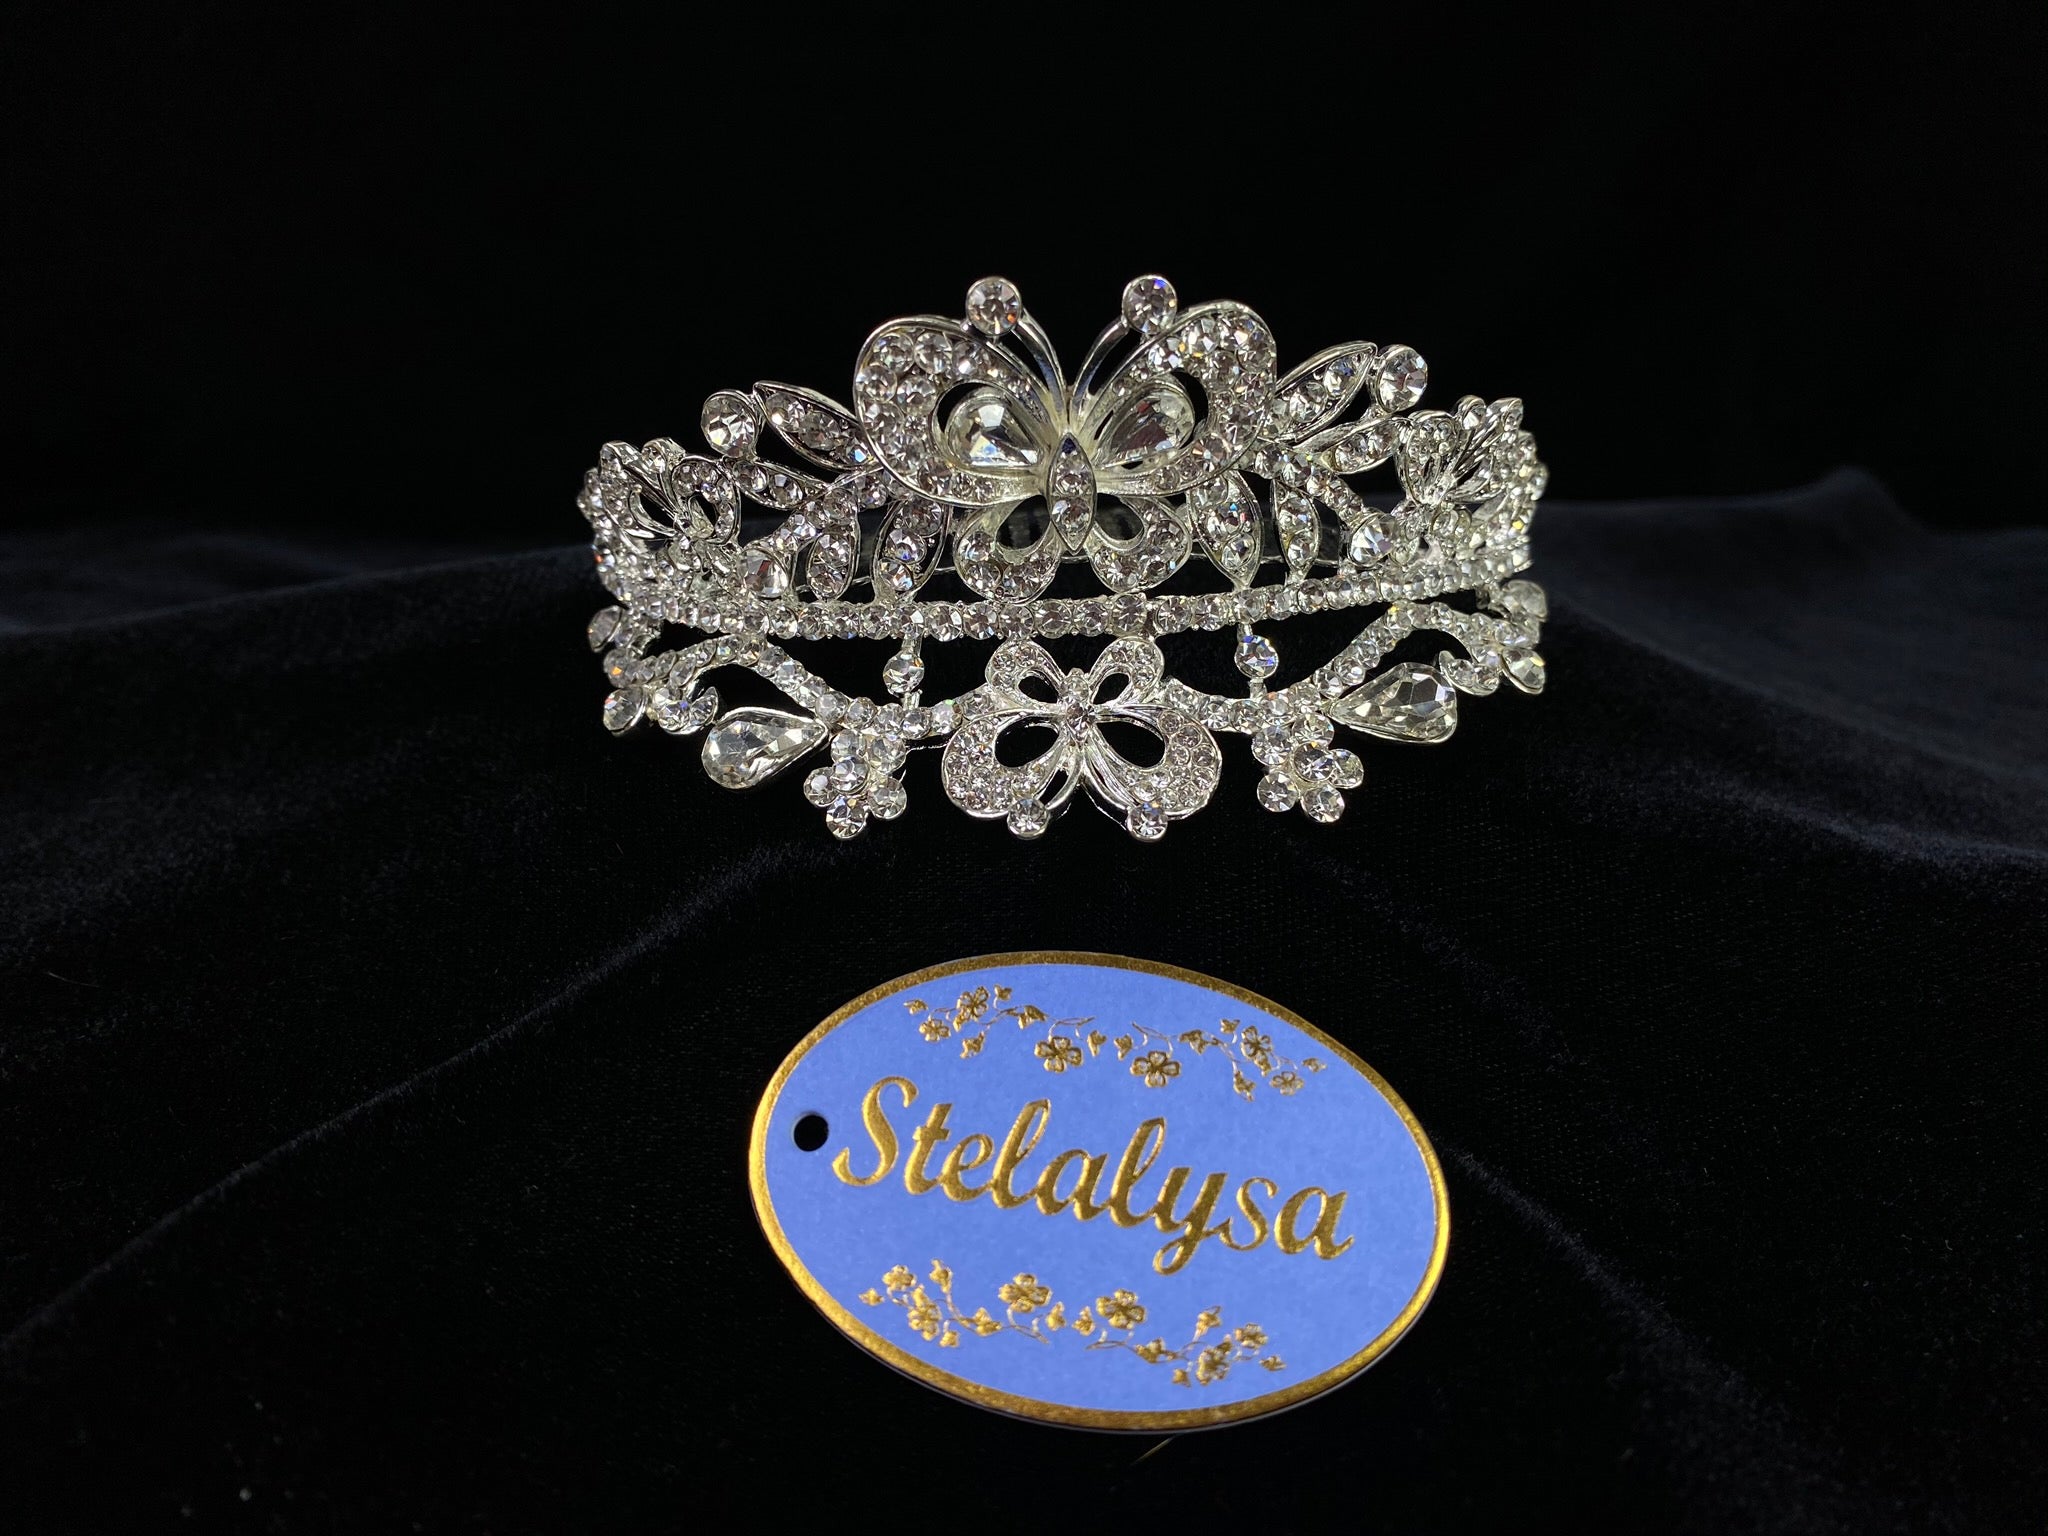 Beautiful tiara, covered in gorgeous rhinestones creating butterflies.  Tiara is 4" wide with a 3" comb.  Wear this tiara with either a white or ivory veil from our Veil Collection to complete the look for the ceremony.